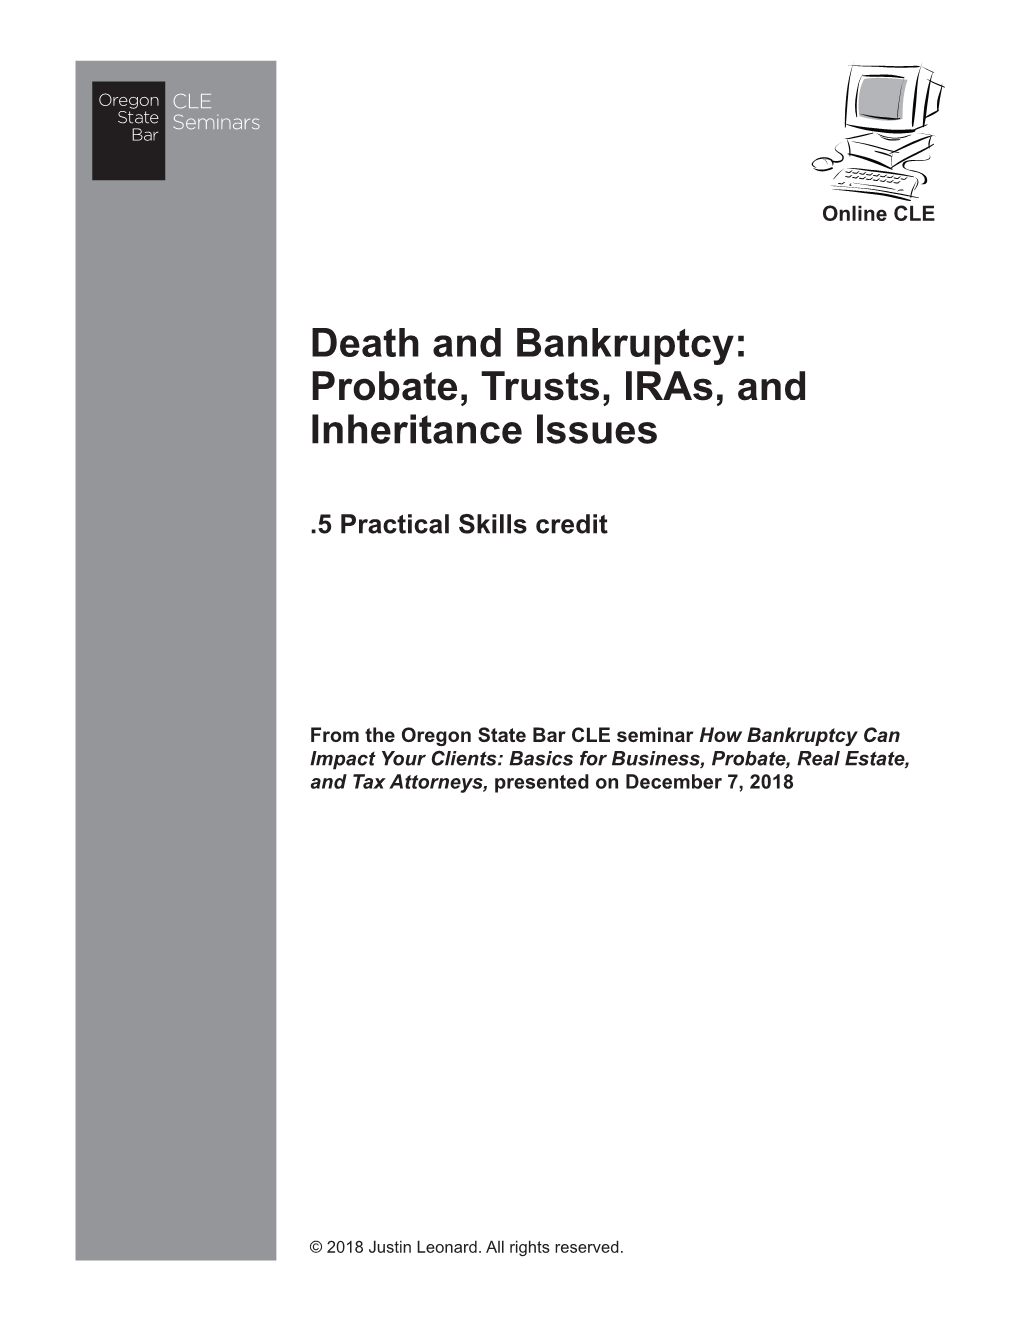 Death and Bankruptcy: Probate, Trusts, Iras, and Inheritance Issues